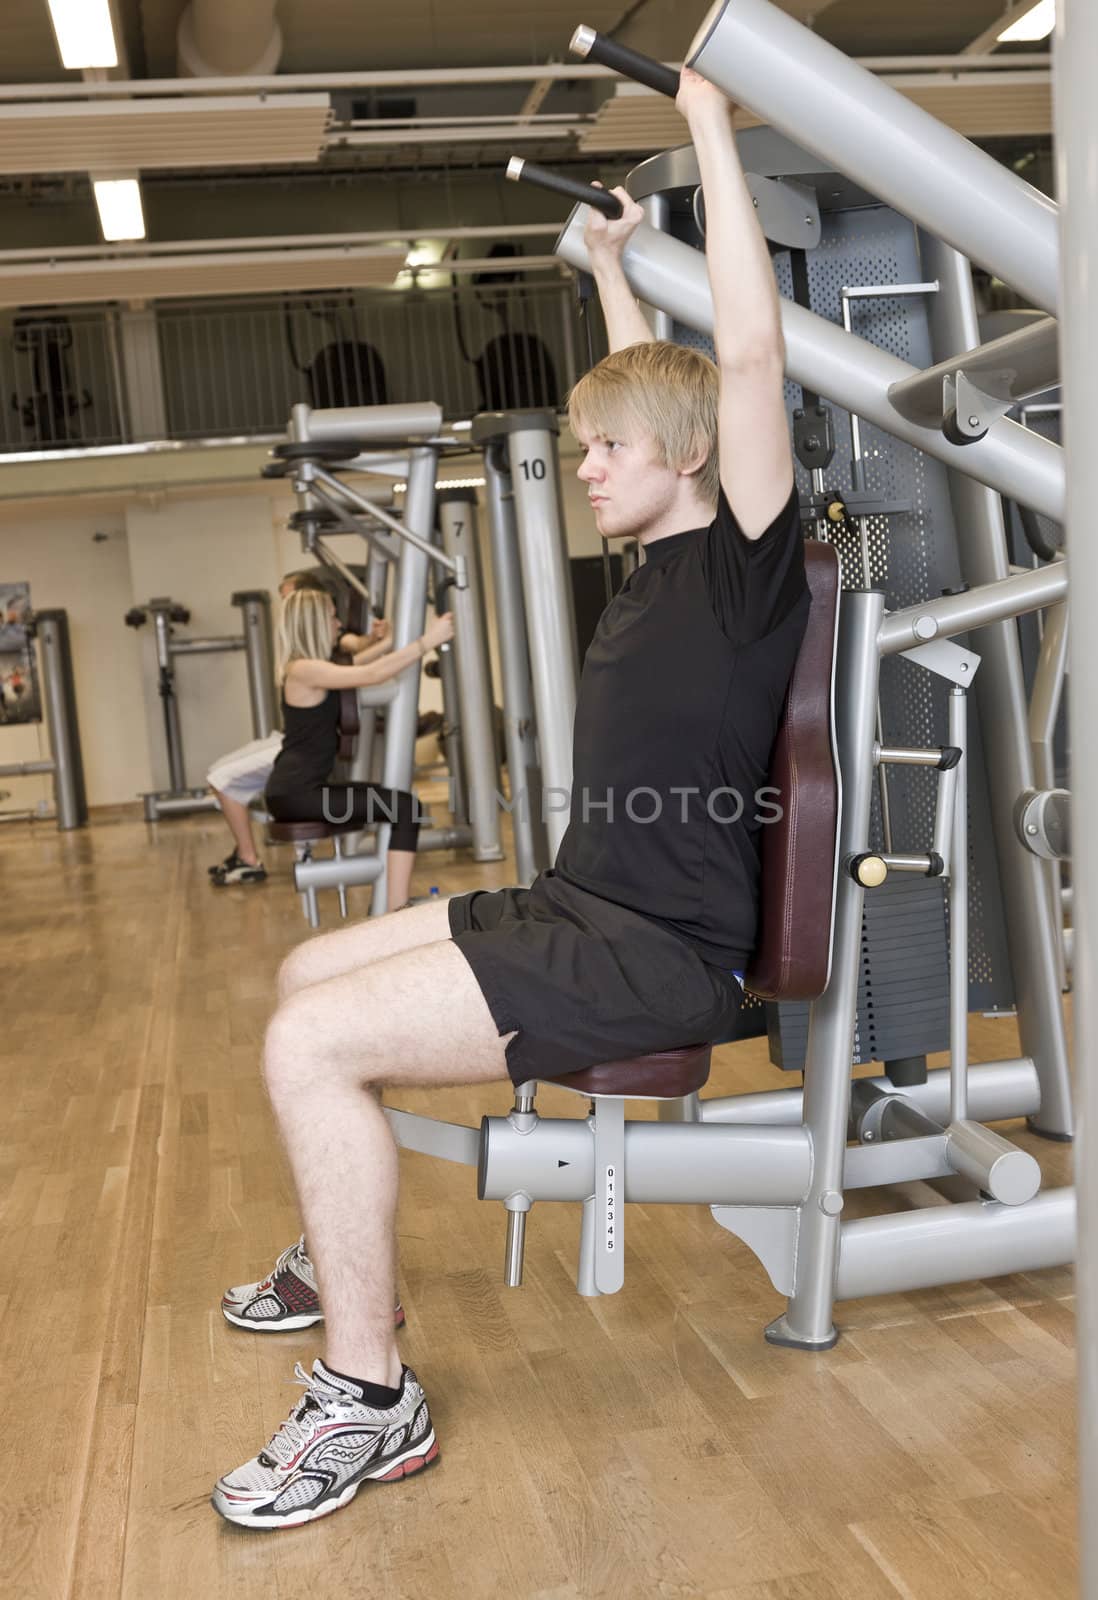 Young man using an exercise machine by gemenacom